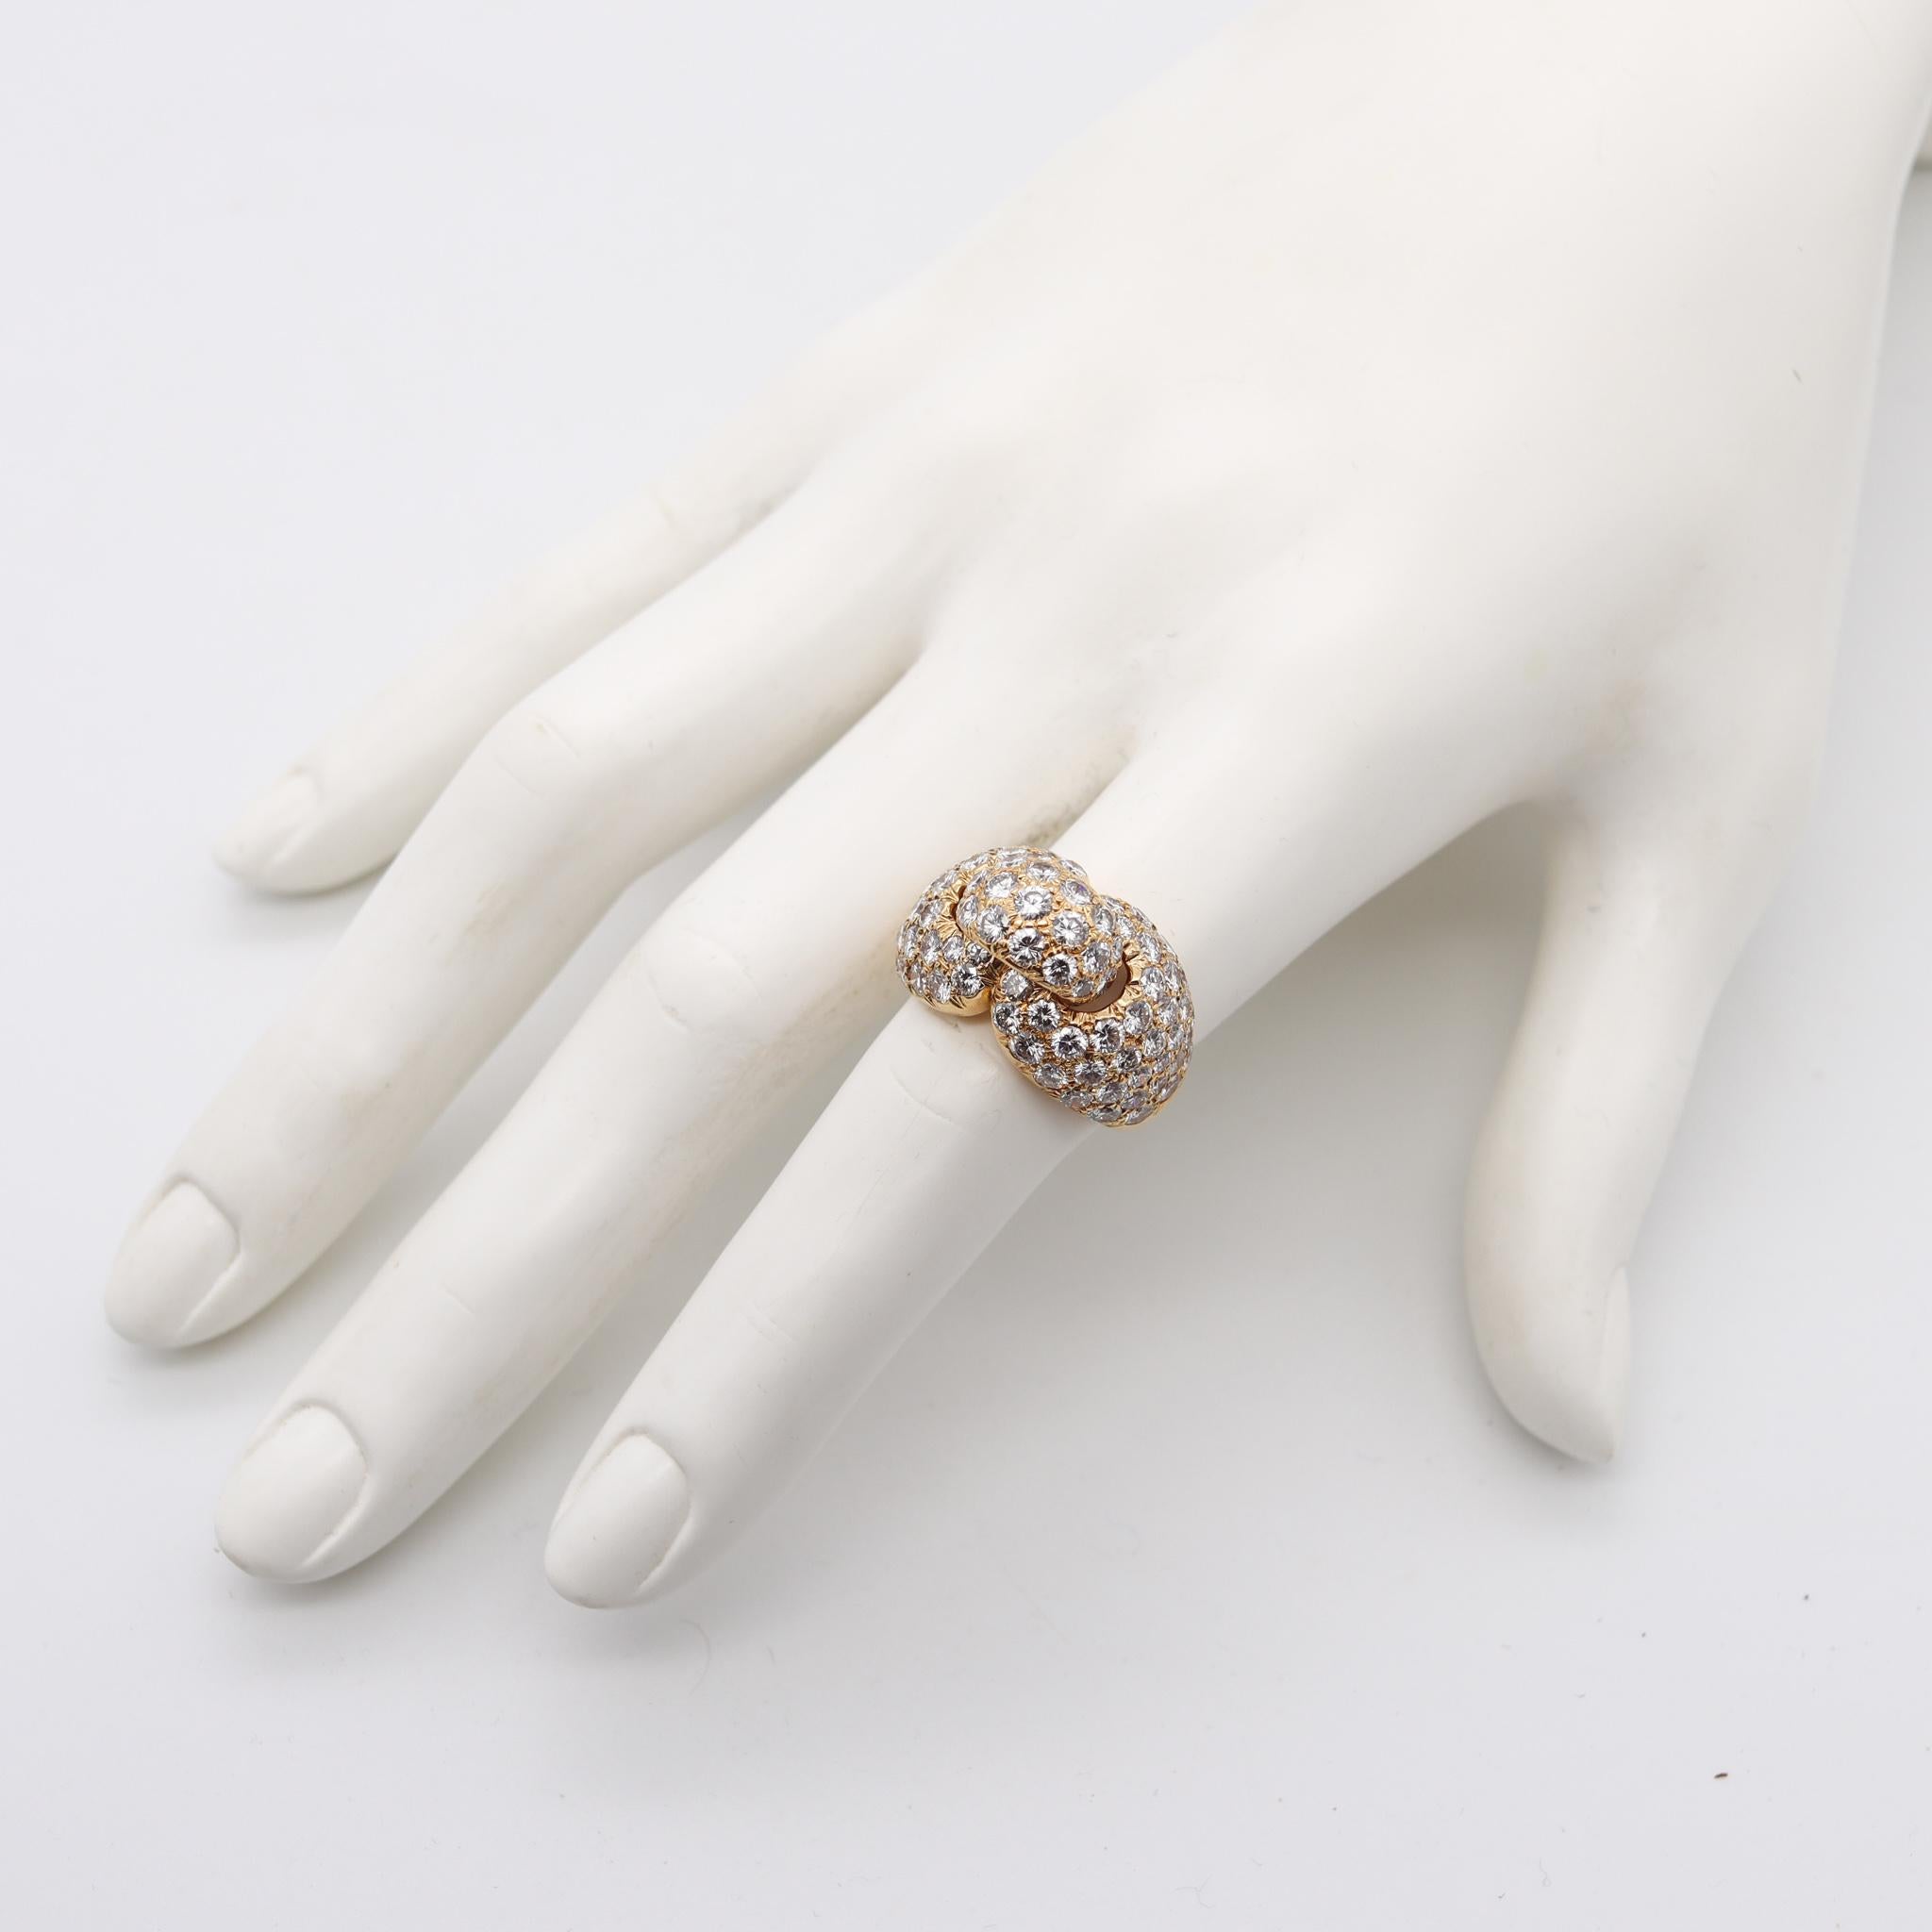 Cocktail Ring designed by Boucheron.

Gorgeous piece, created in Paris France by the house of Boucheron, back in the 1960's-1970's. This fabulous cocktail ring has been carefully crafted in solid yellow gold of 18 karats, with very high polish